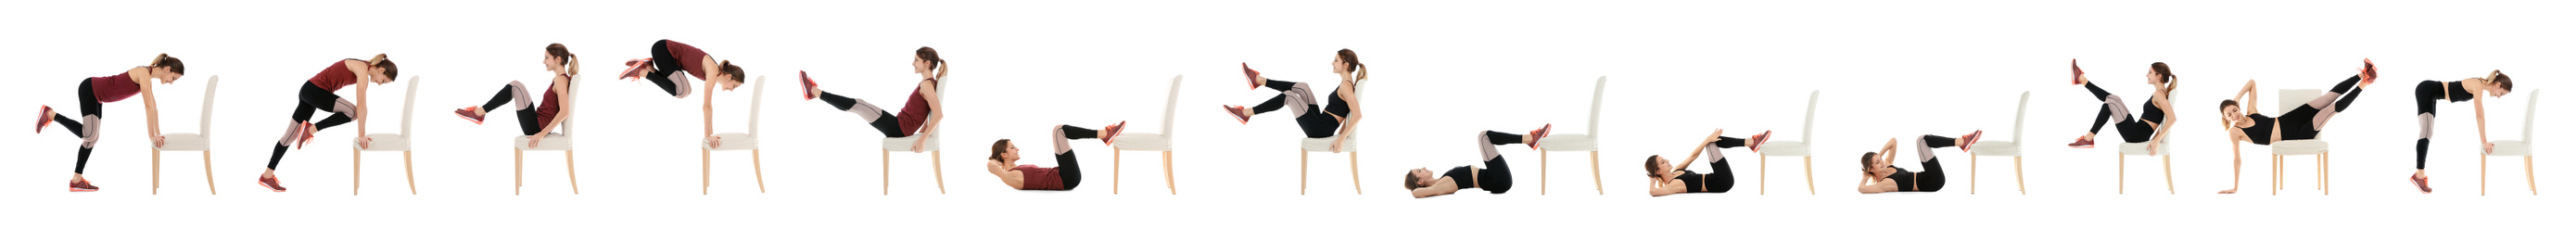 Collage of young woman exercising with chair on white background. Banner design